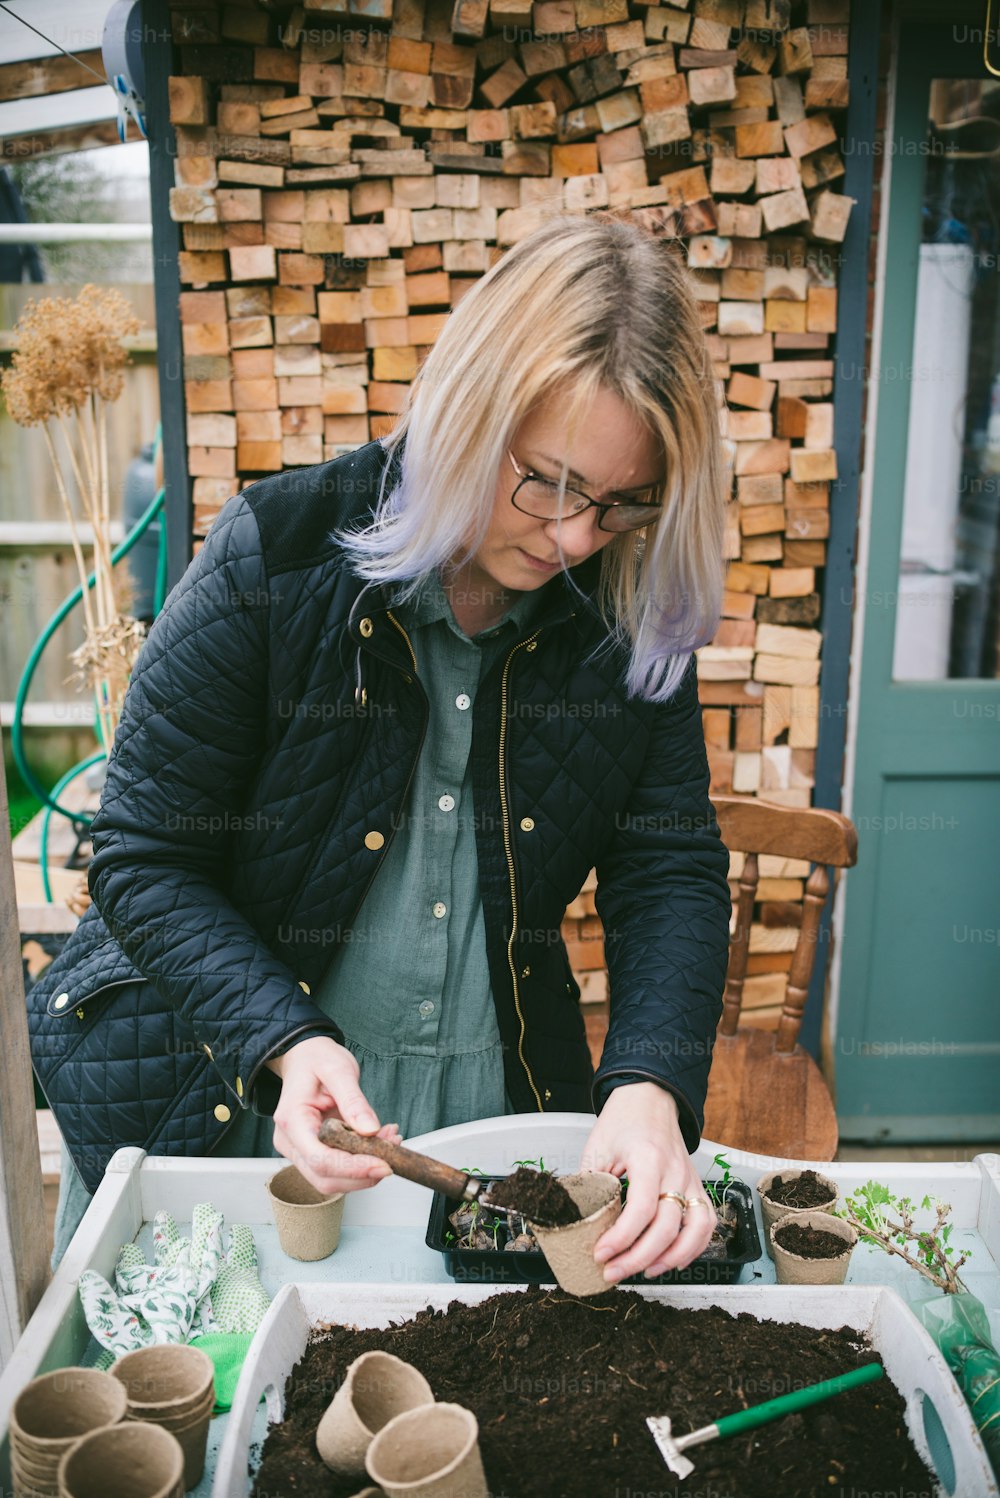 a woman in a black jacket and some dirt and plants